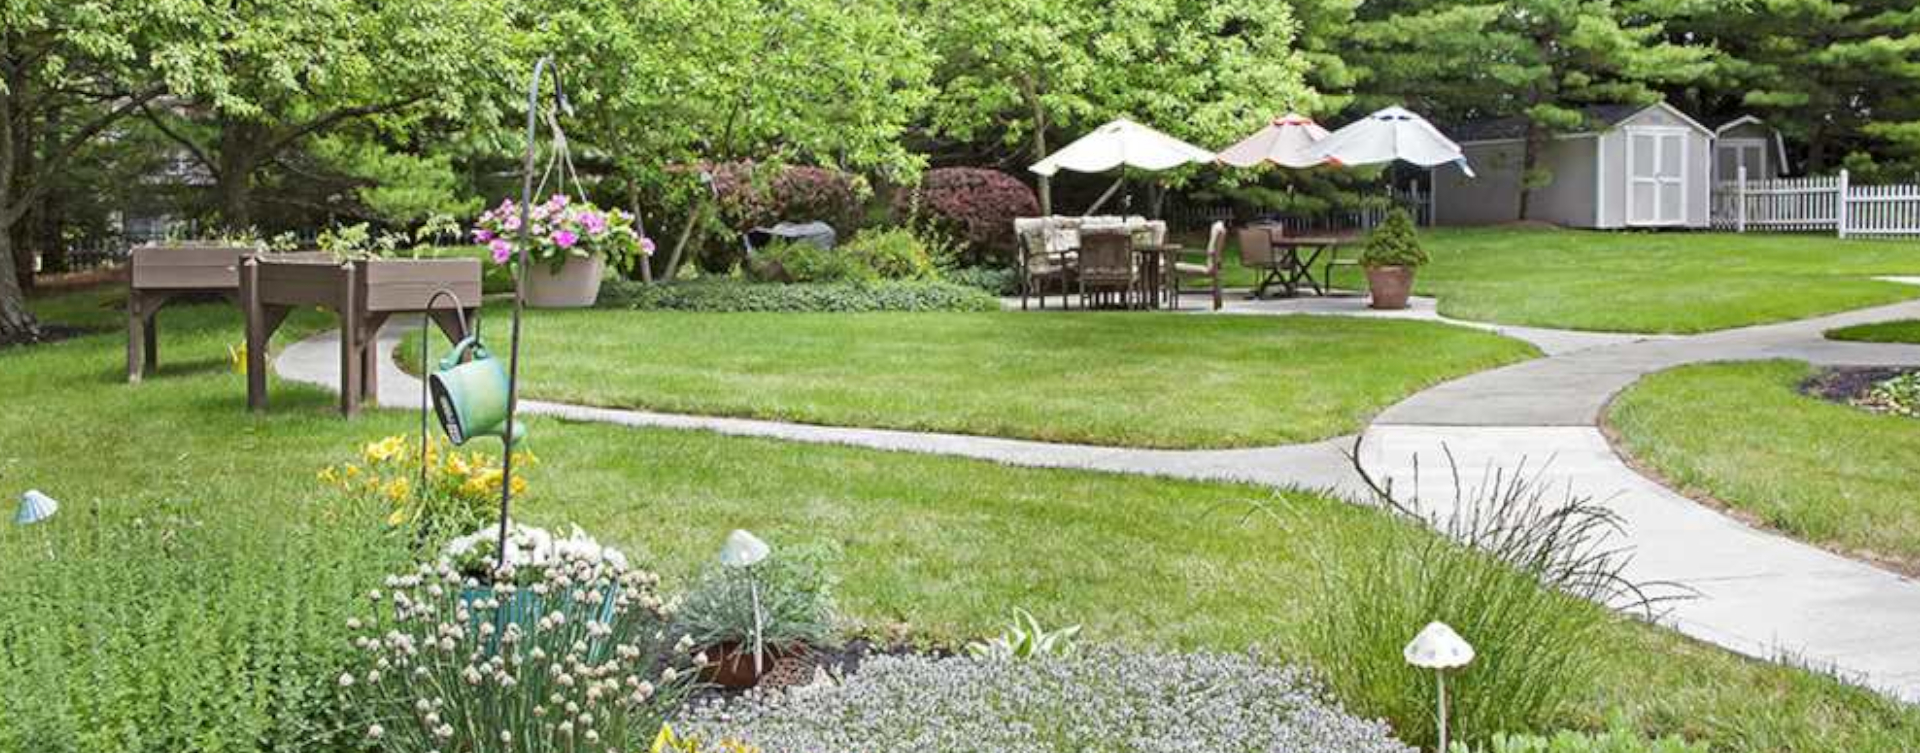 Enjoy bird watching, gardening and barbecuing in our courtyard at Bickford of Scioto